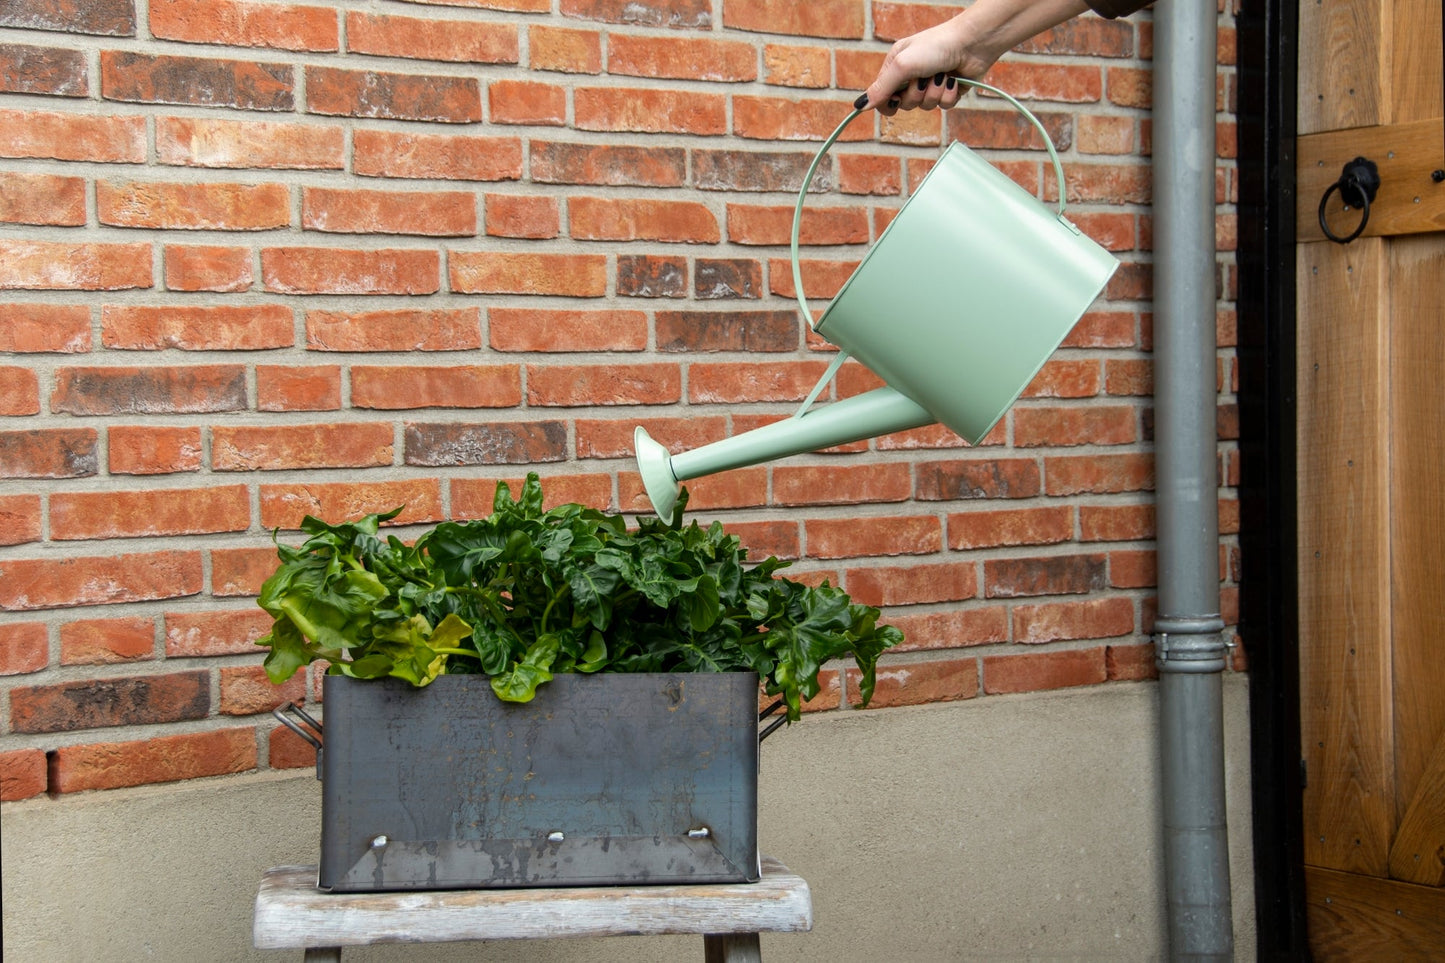 50 Shades of Green Outdoor Watering Can, 3 assorte